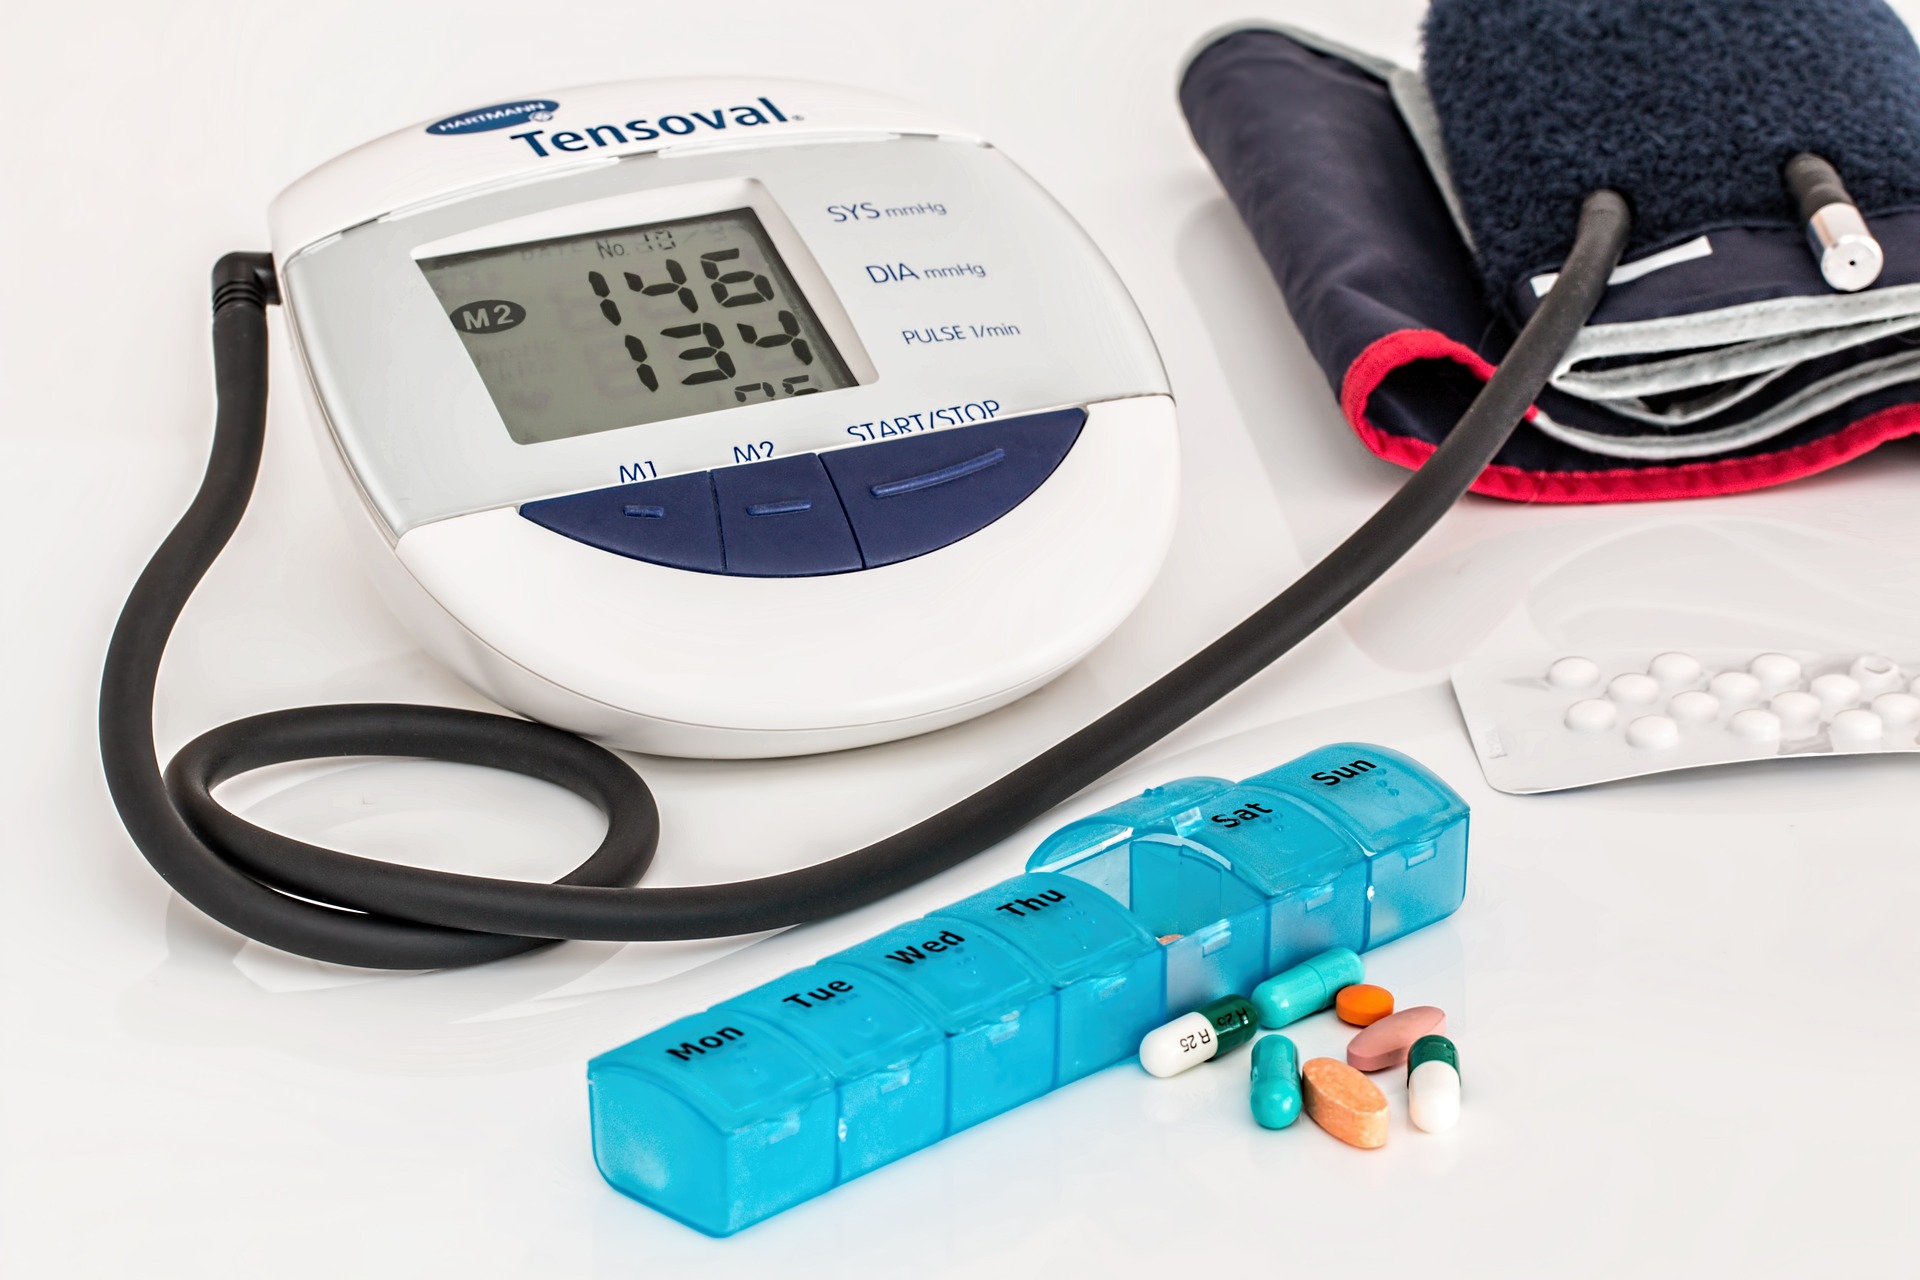 Medical equipment including a blood pressure monitor and tablets- our medical negligence compensation solicitors can help you make a no win no fee claim.  Click on this link to visit our medical diagnosis negligence claims page.